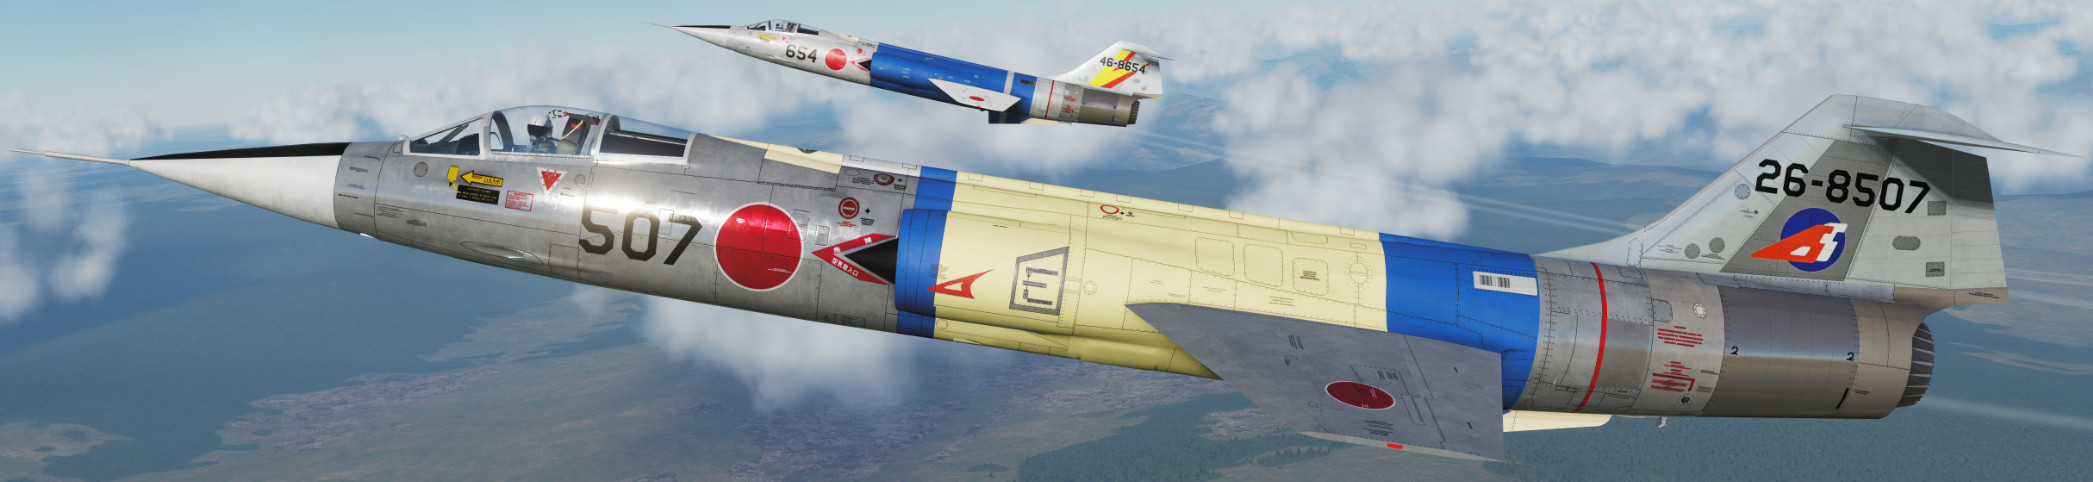 2 JASDF F-104J skins for the F-104G by VSN